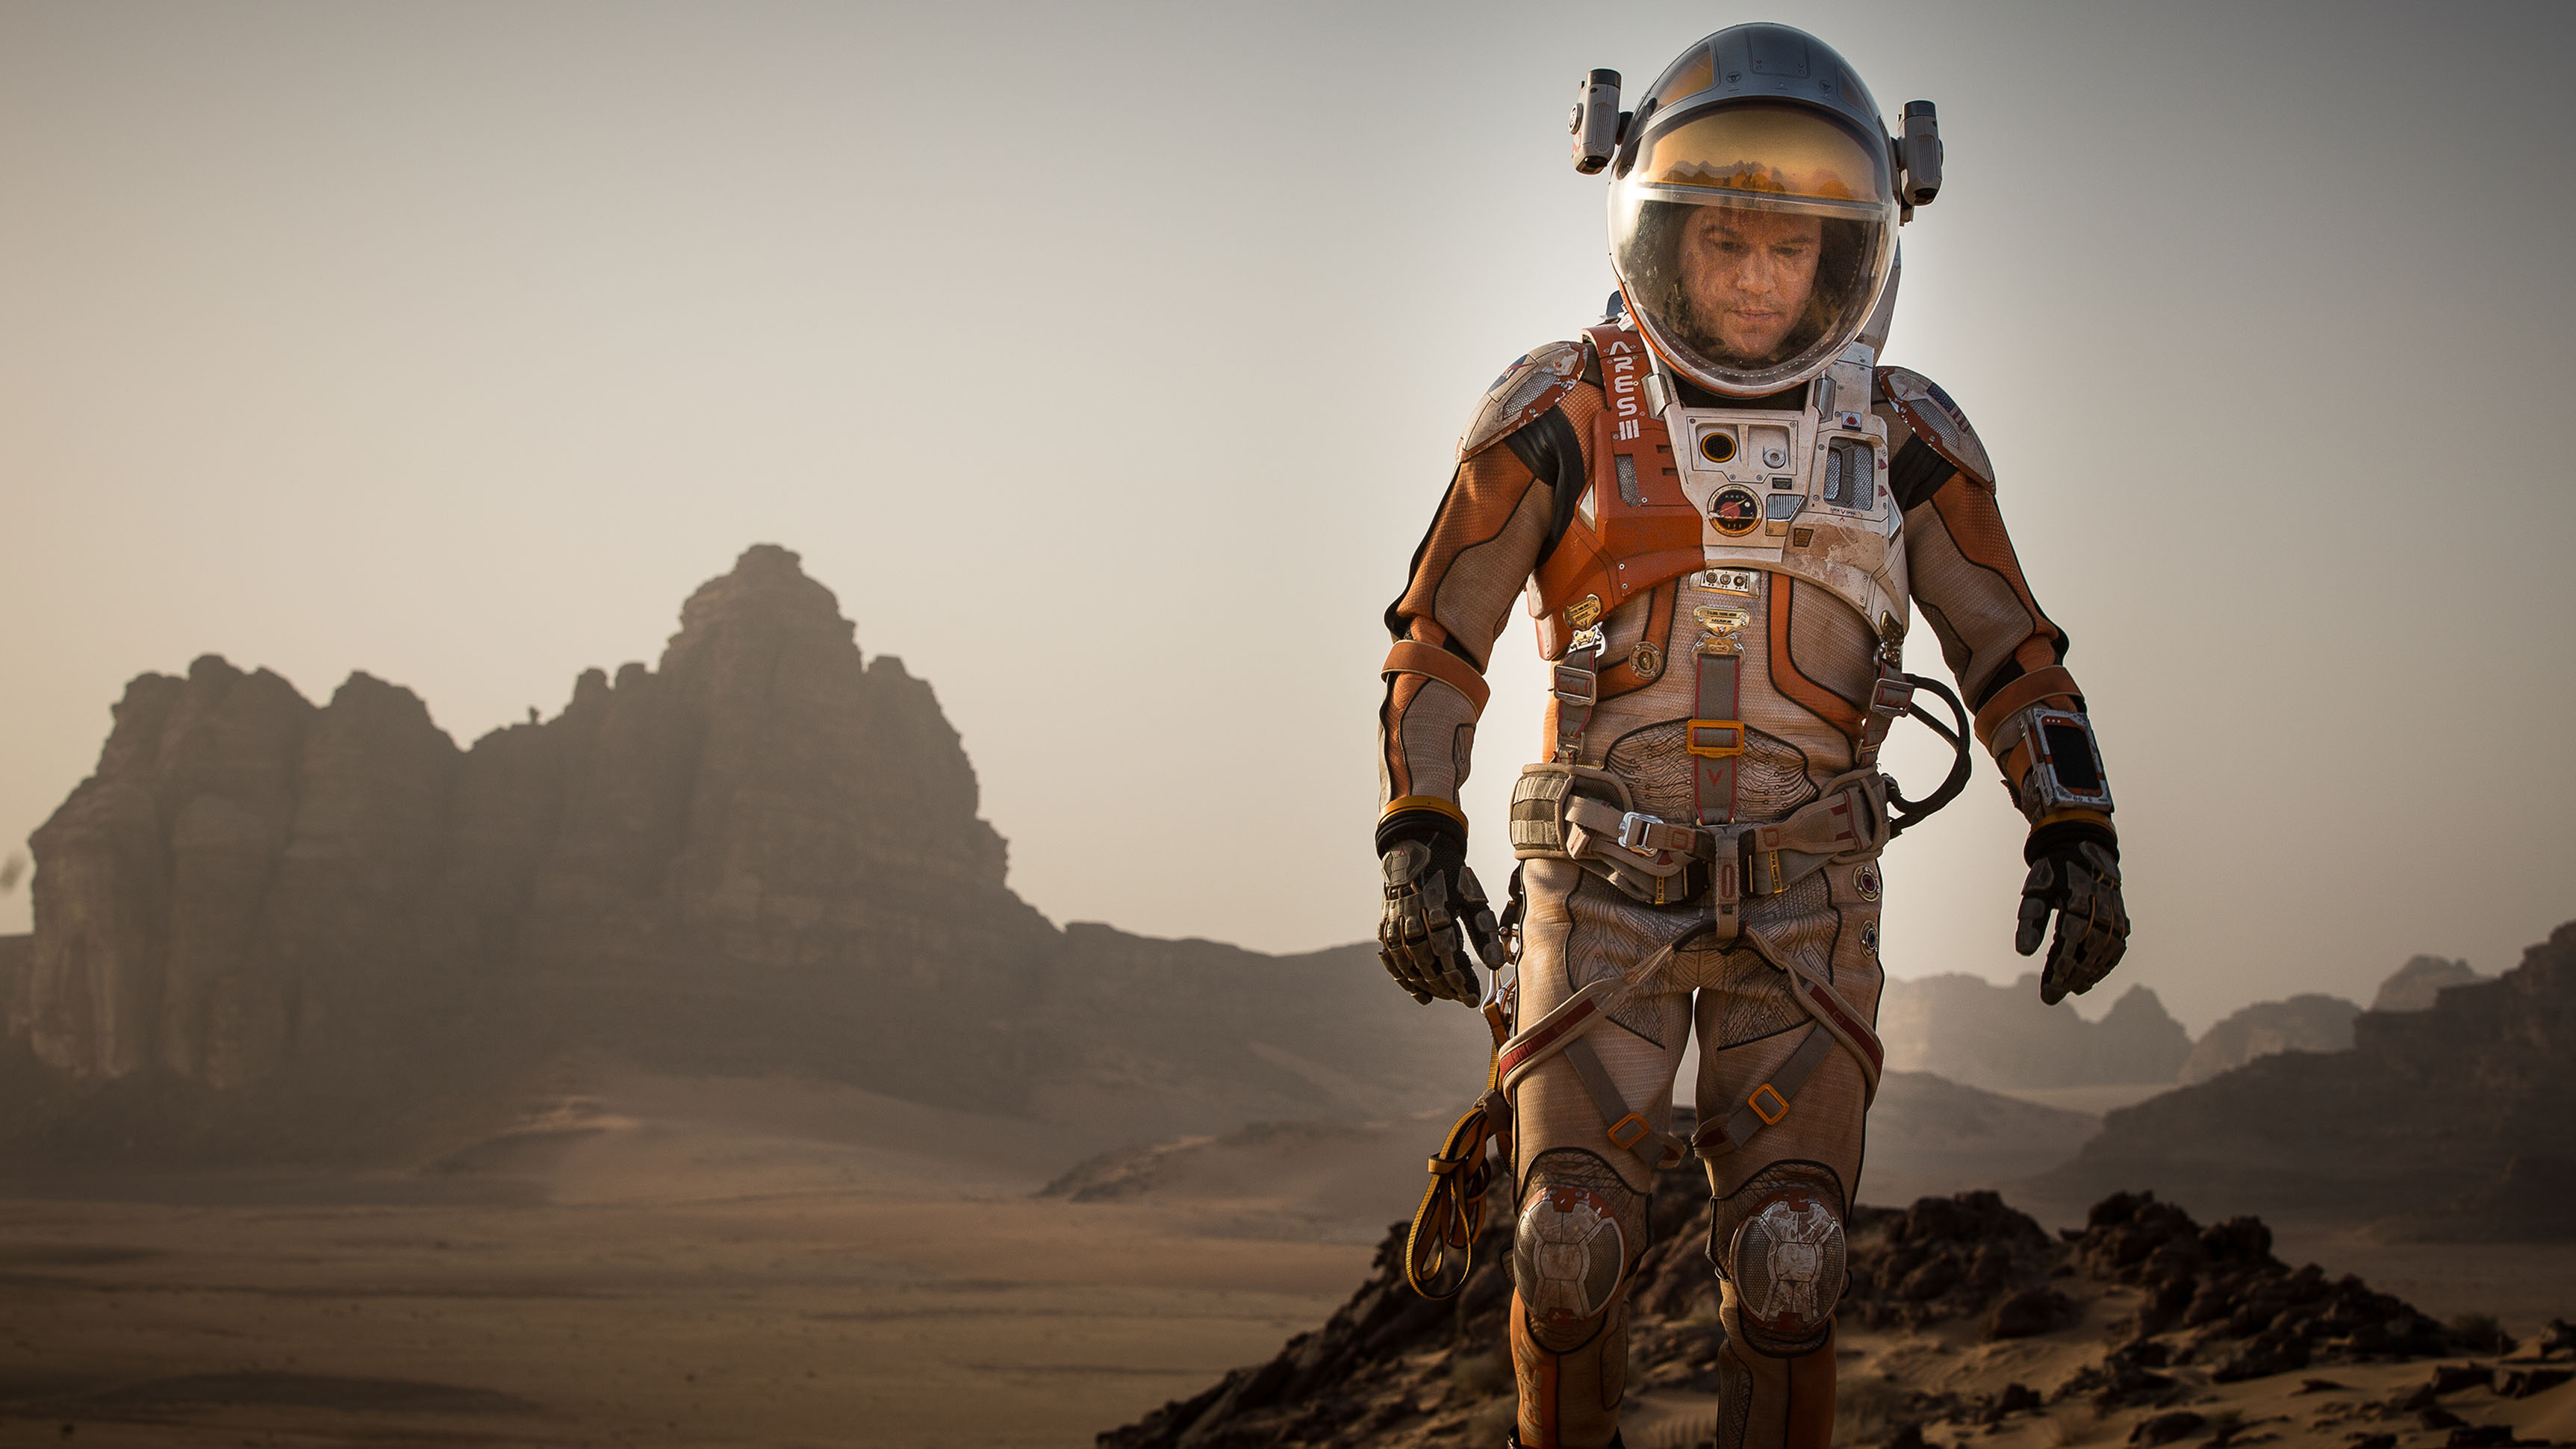 Art of the Cut: The Martian with Cheryl Potter 3